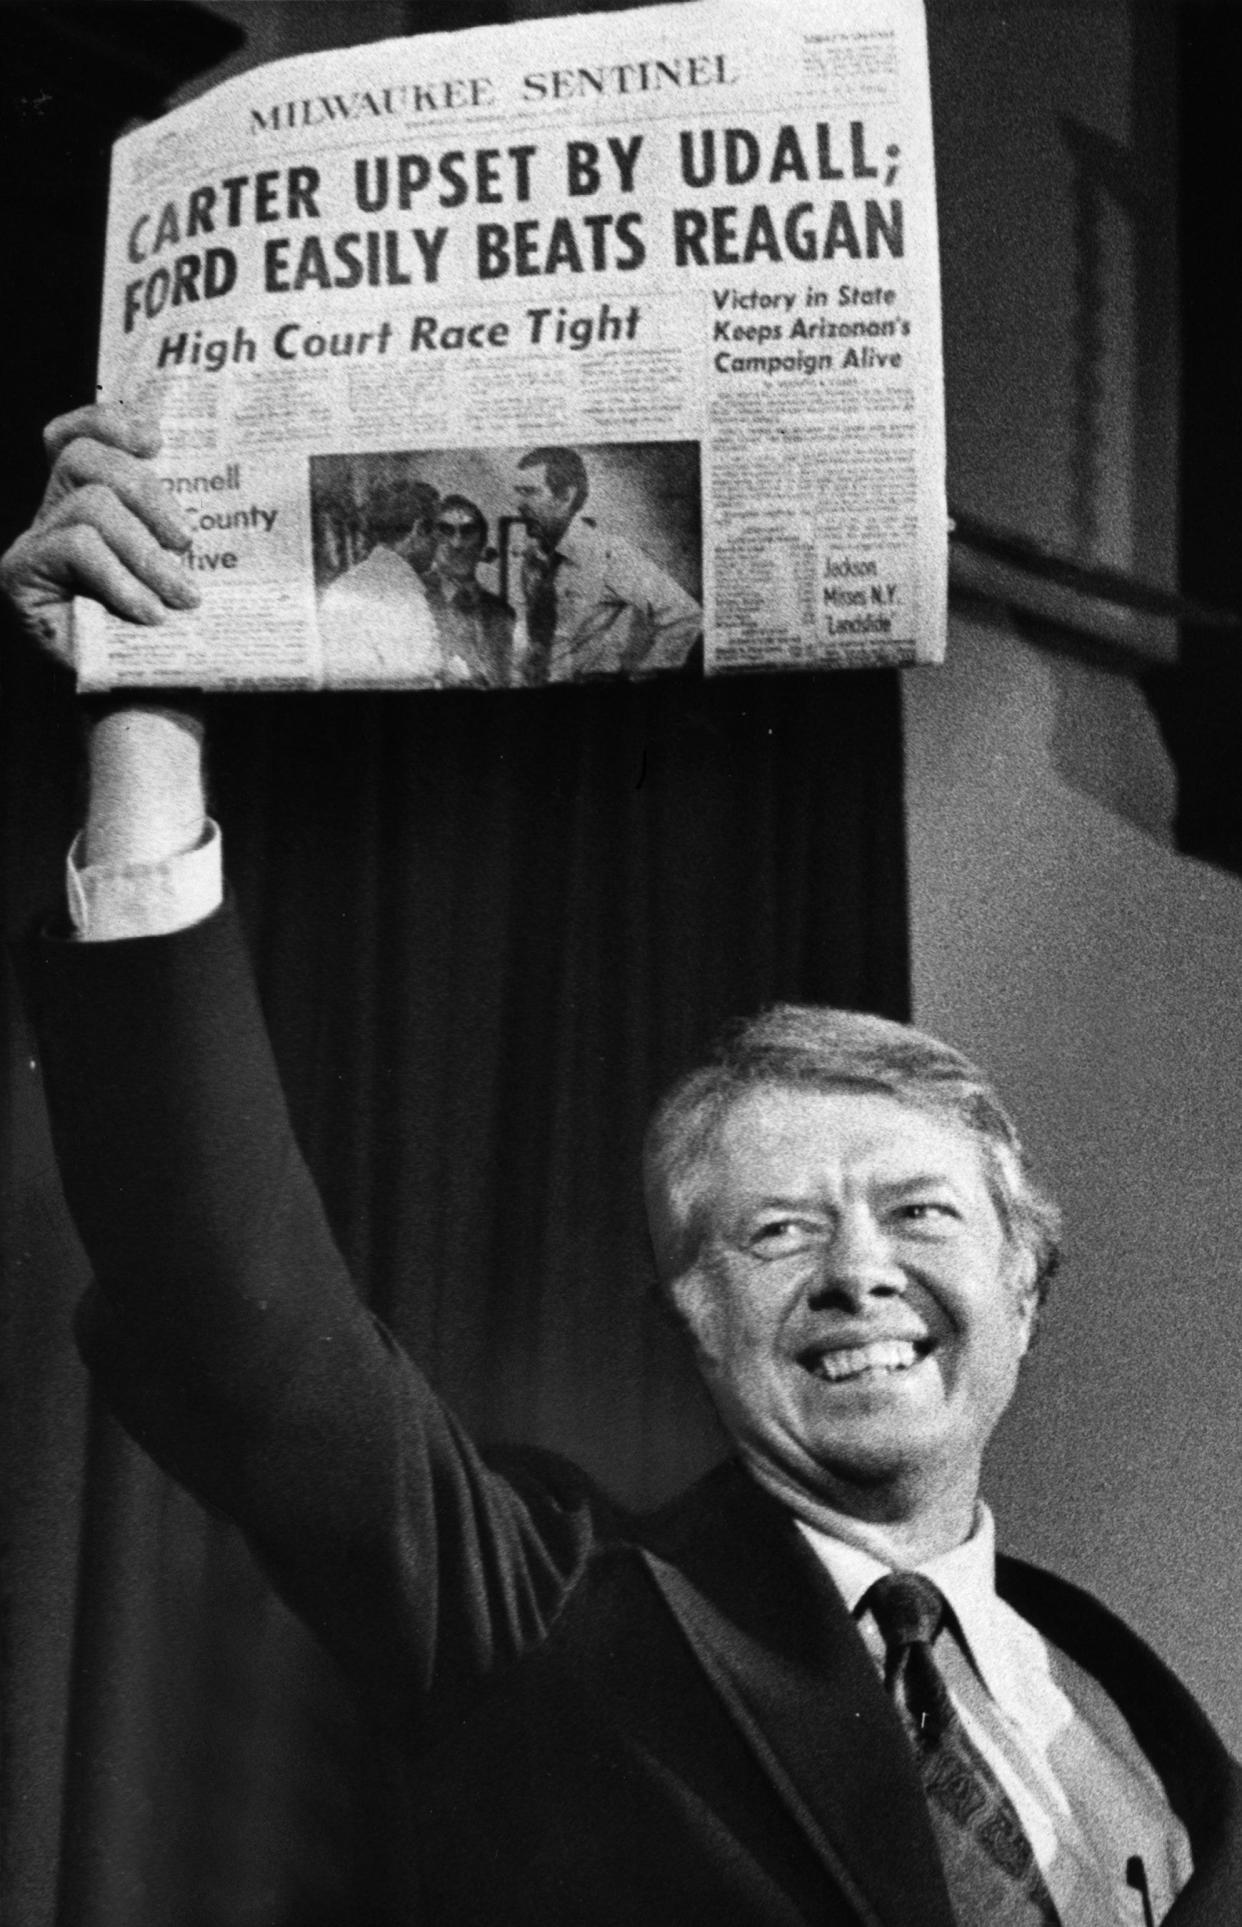 Jimmy Carter holds up an early edition of the April 7, 1976, Milwaukee Sentinel, the day after he pulled out a close victory in the Wisconsin Primary over Republican Democrat Morris Udall. This photo was published in the April 7, 1976, Milwaukee Journal.